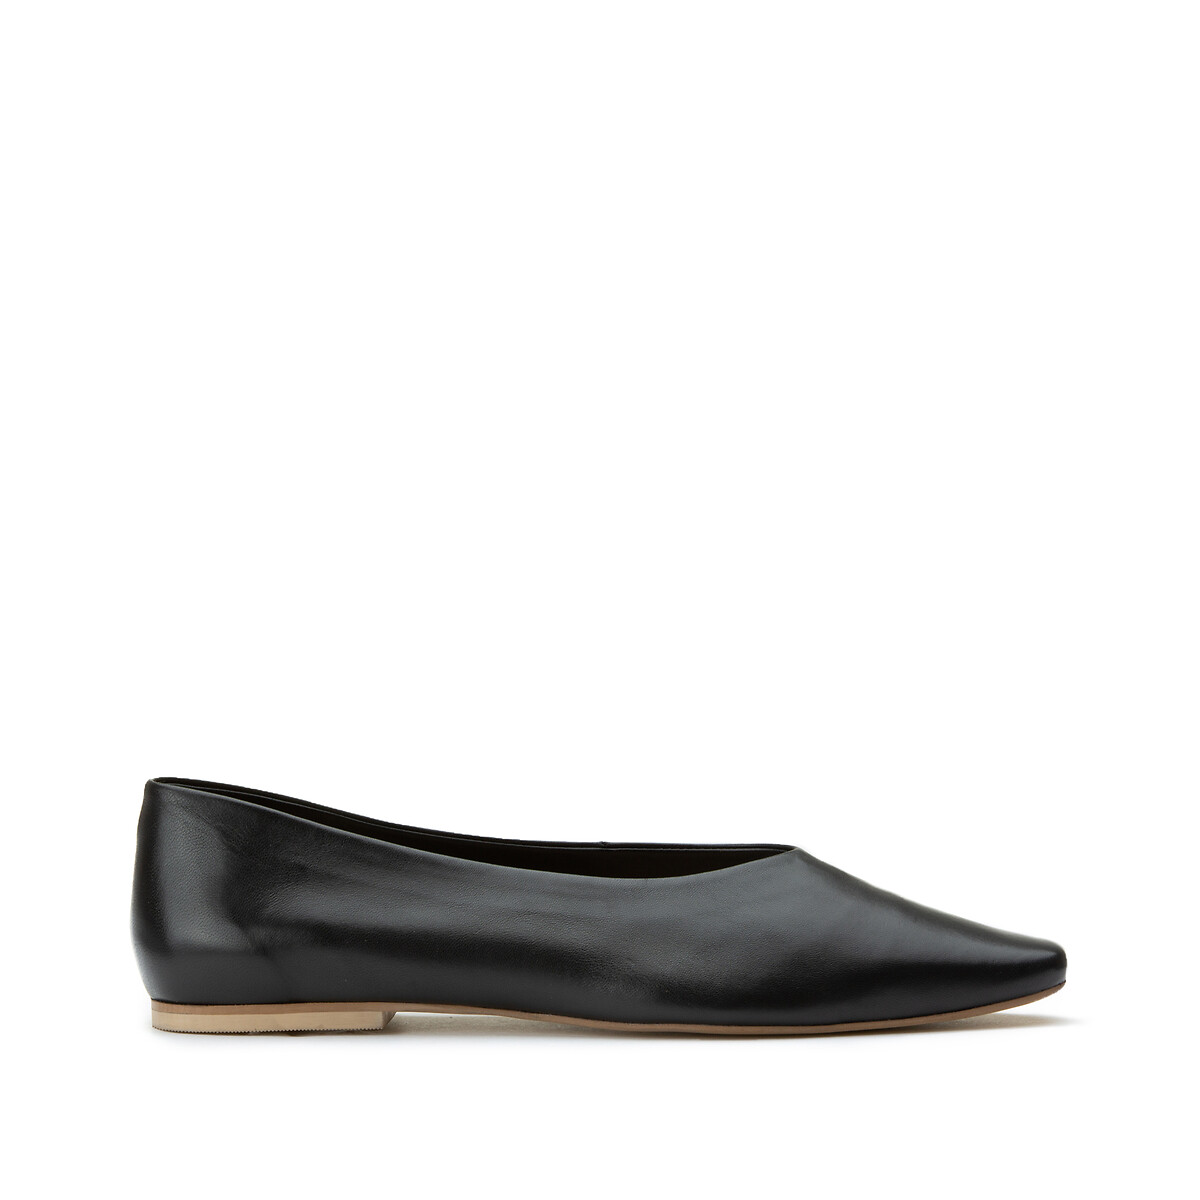 La Redoute Chaussures Ballerines Babies Cuir Fify 